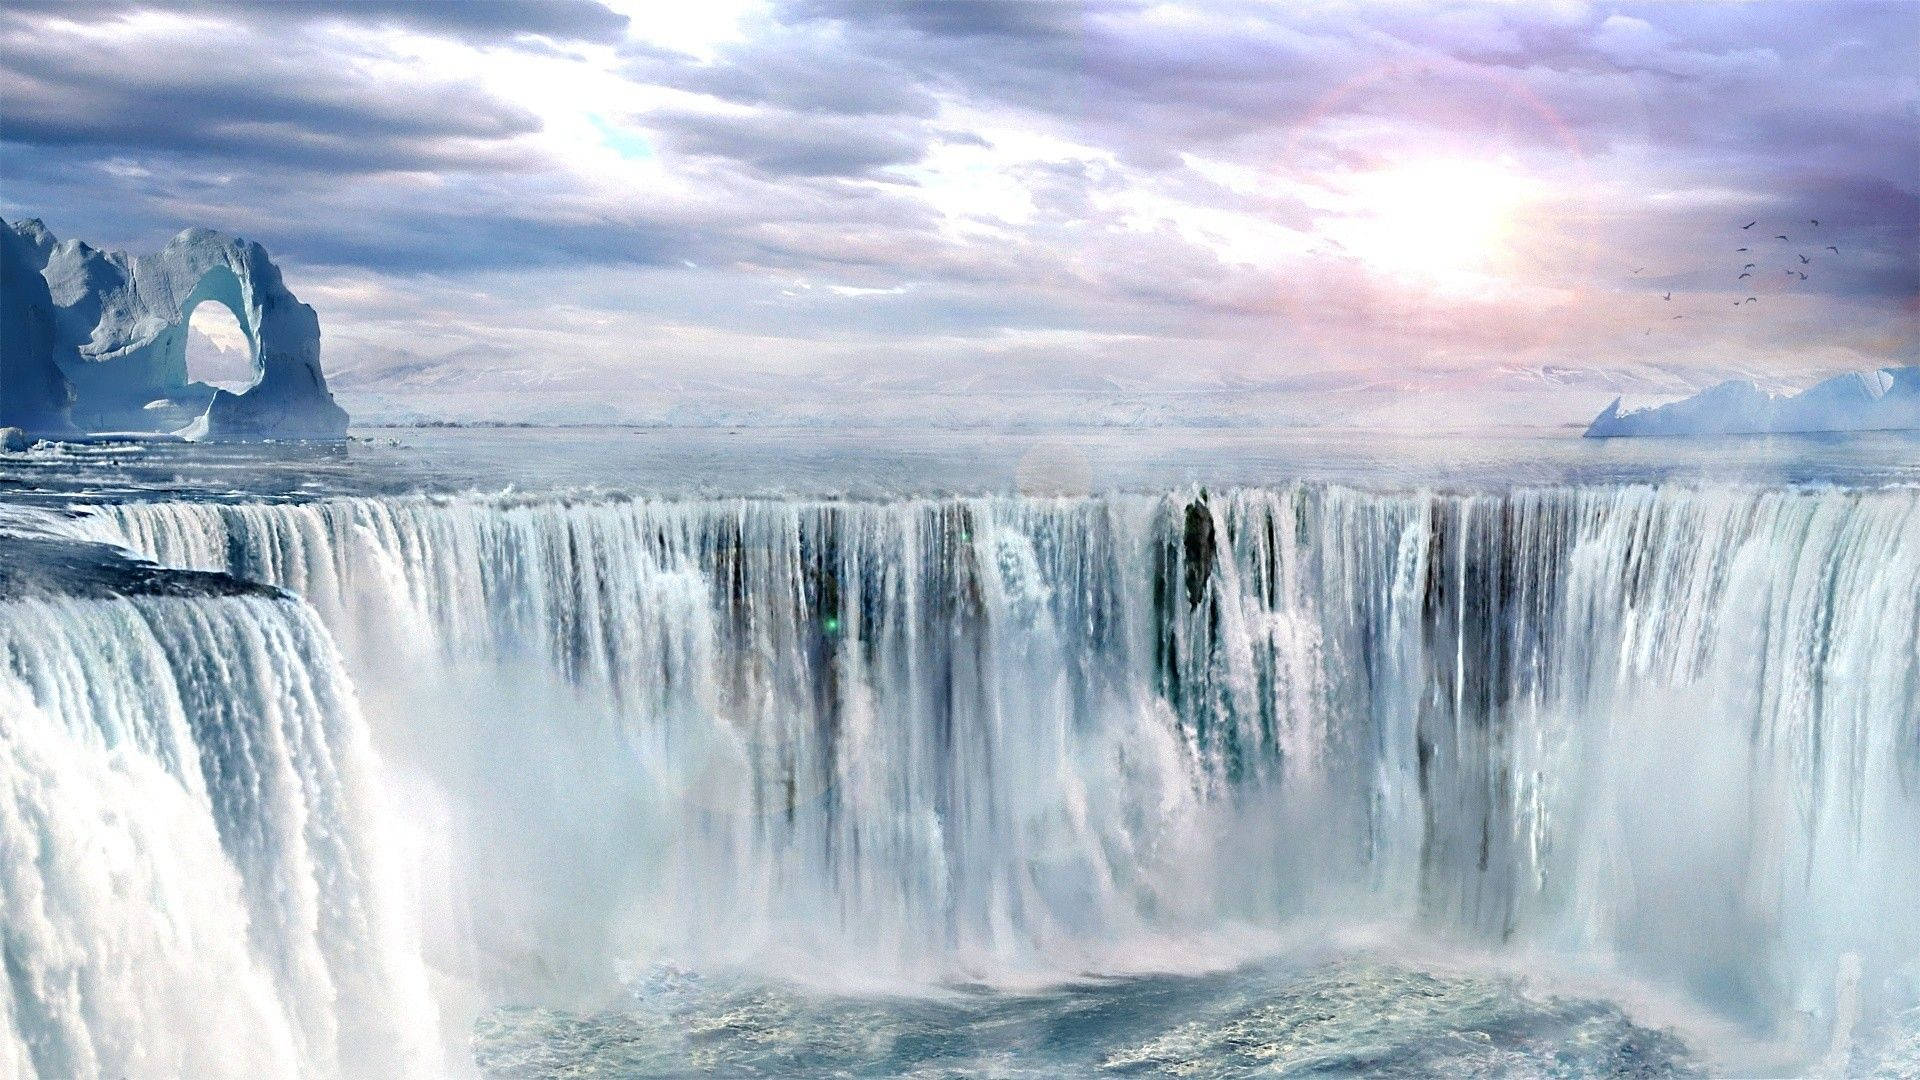 Niagara Falls, one of the most breathtaking waterfalls on the planet Wallpaper